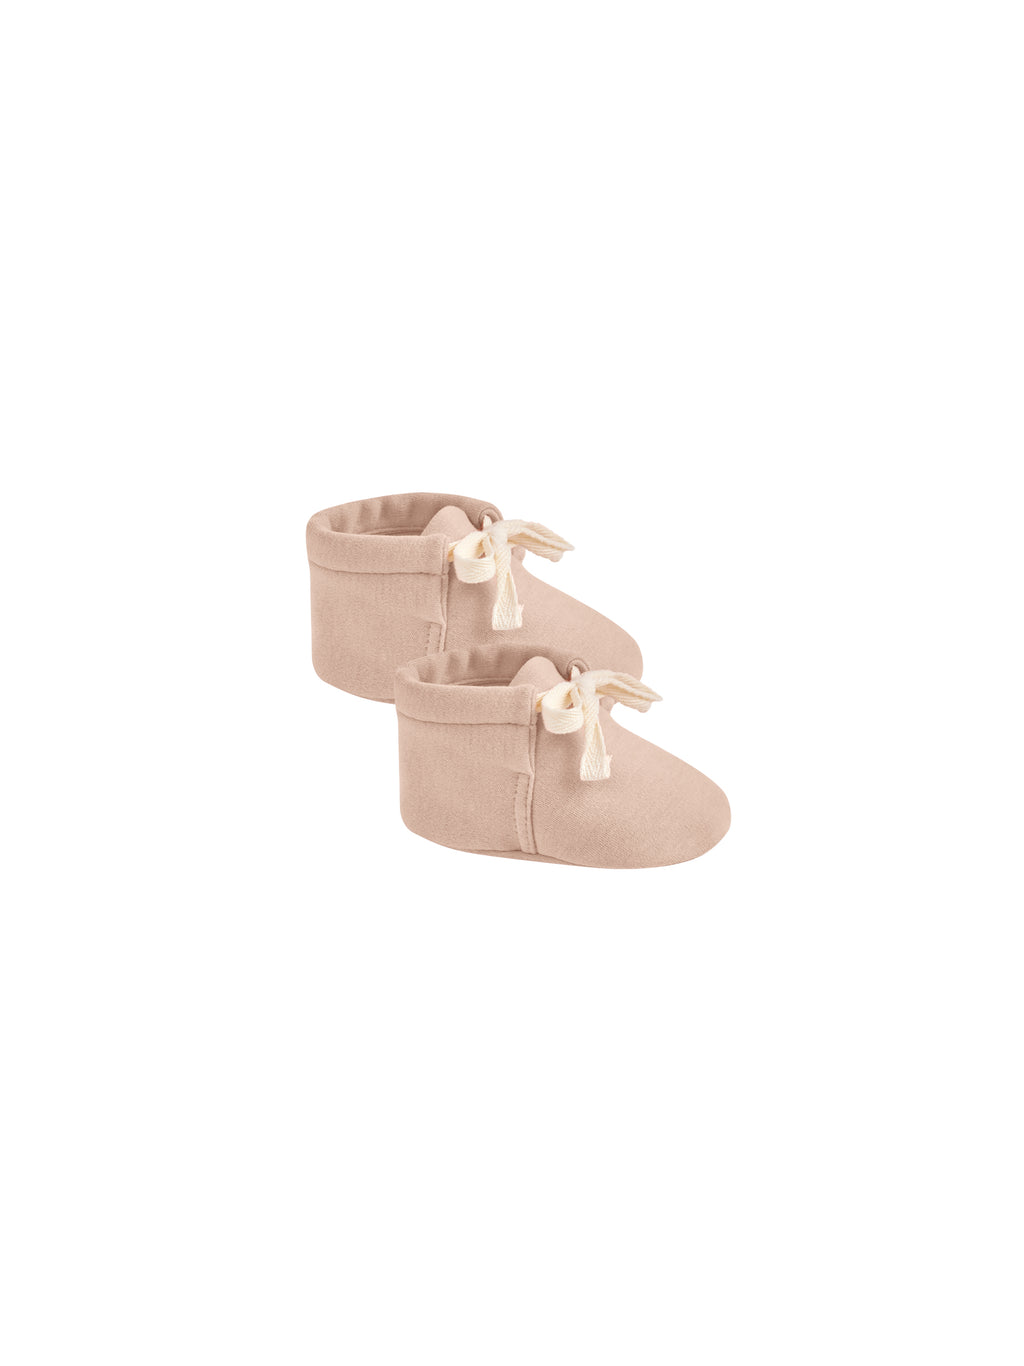 Quincy Mae Baby Booties - Blush